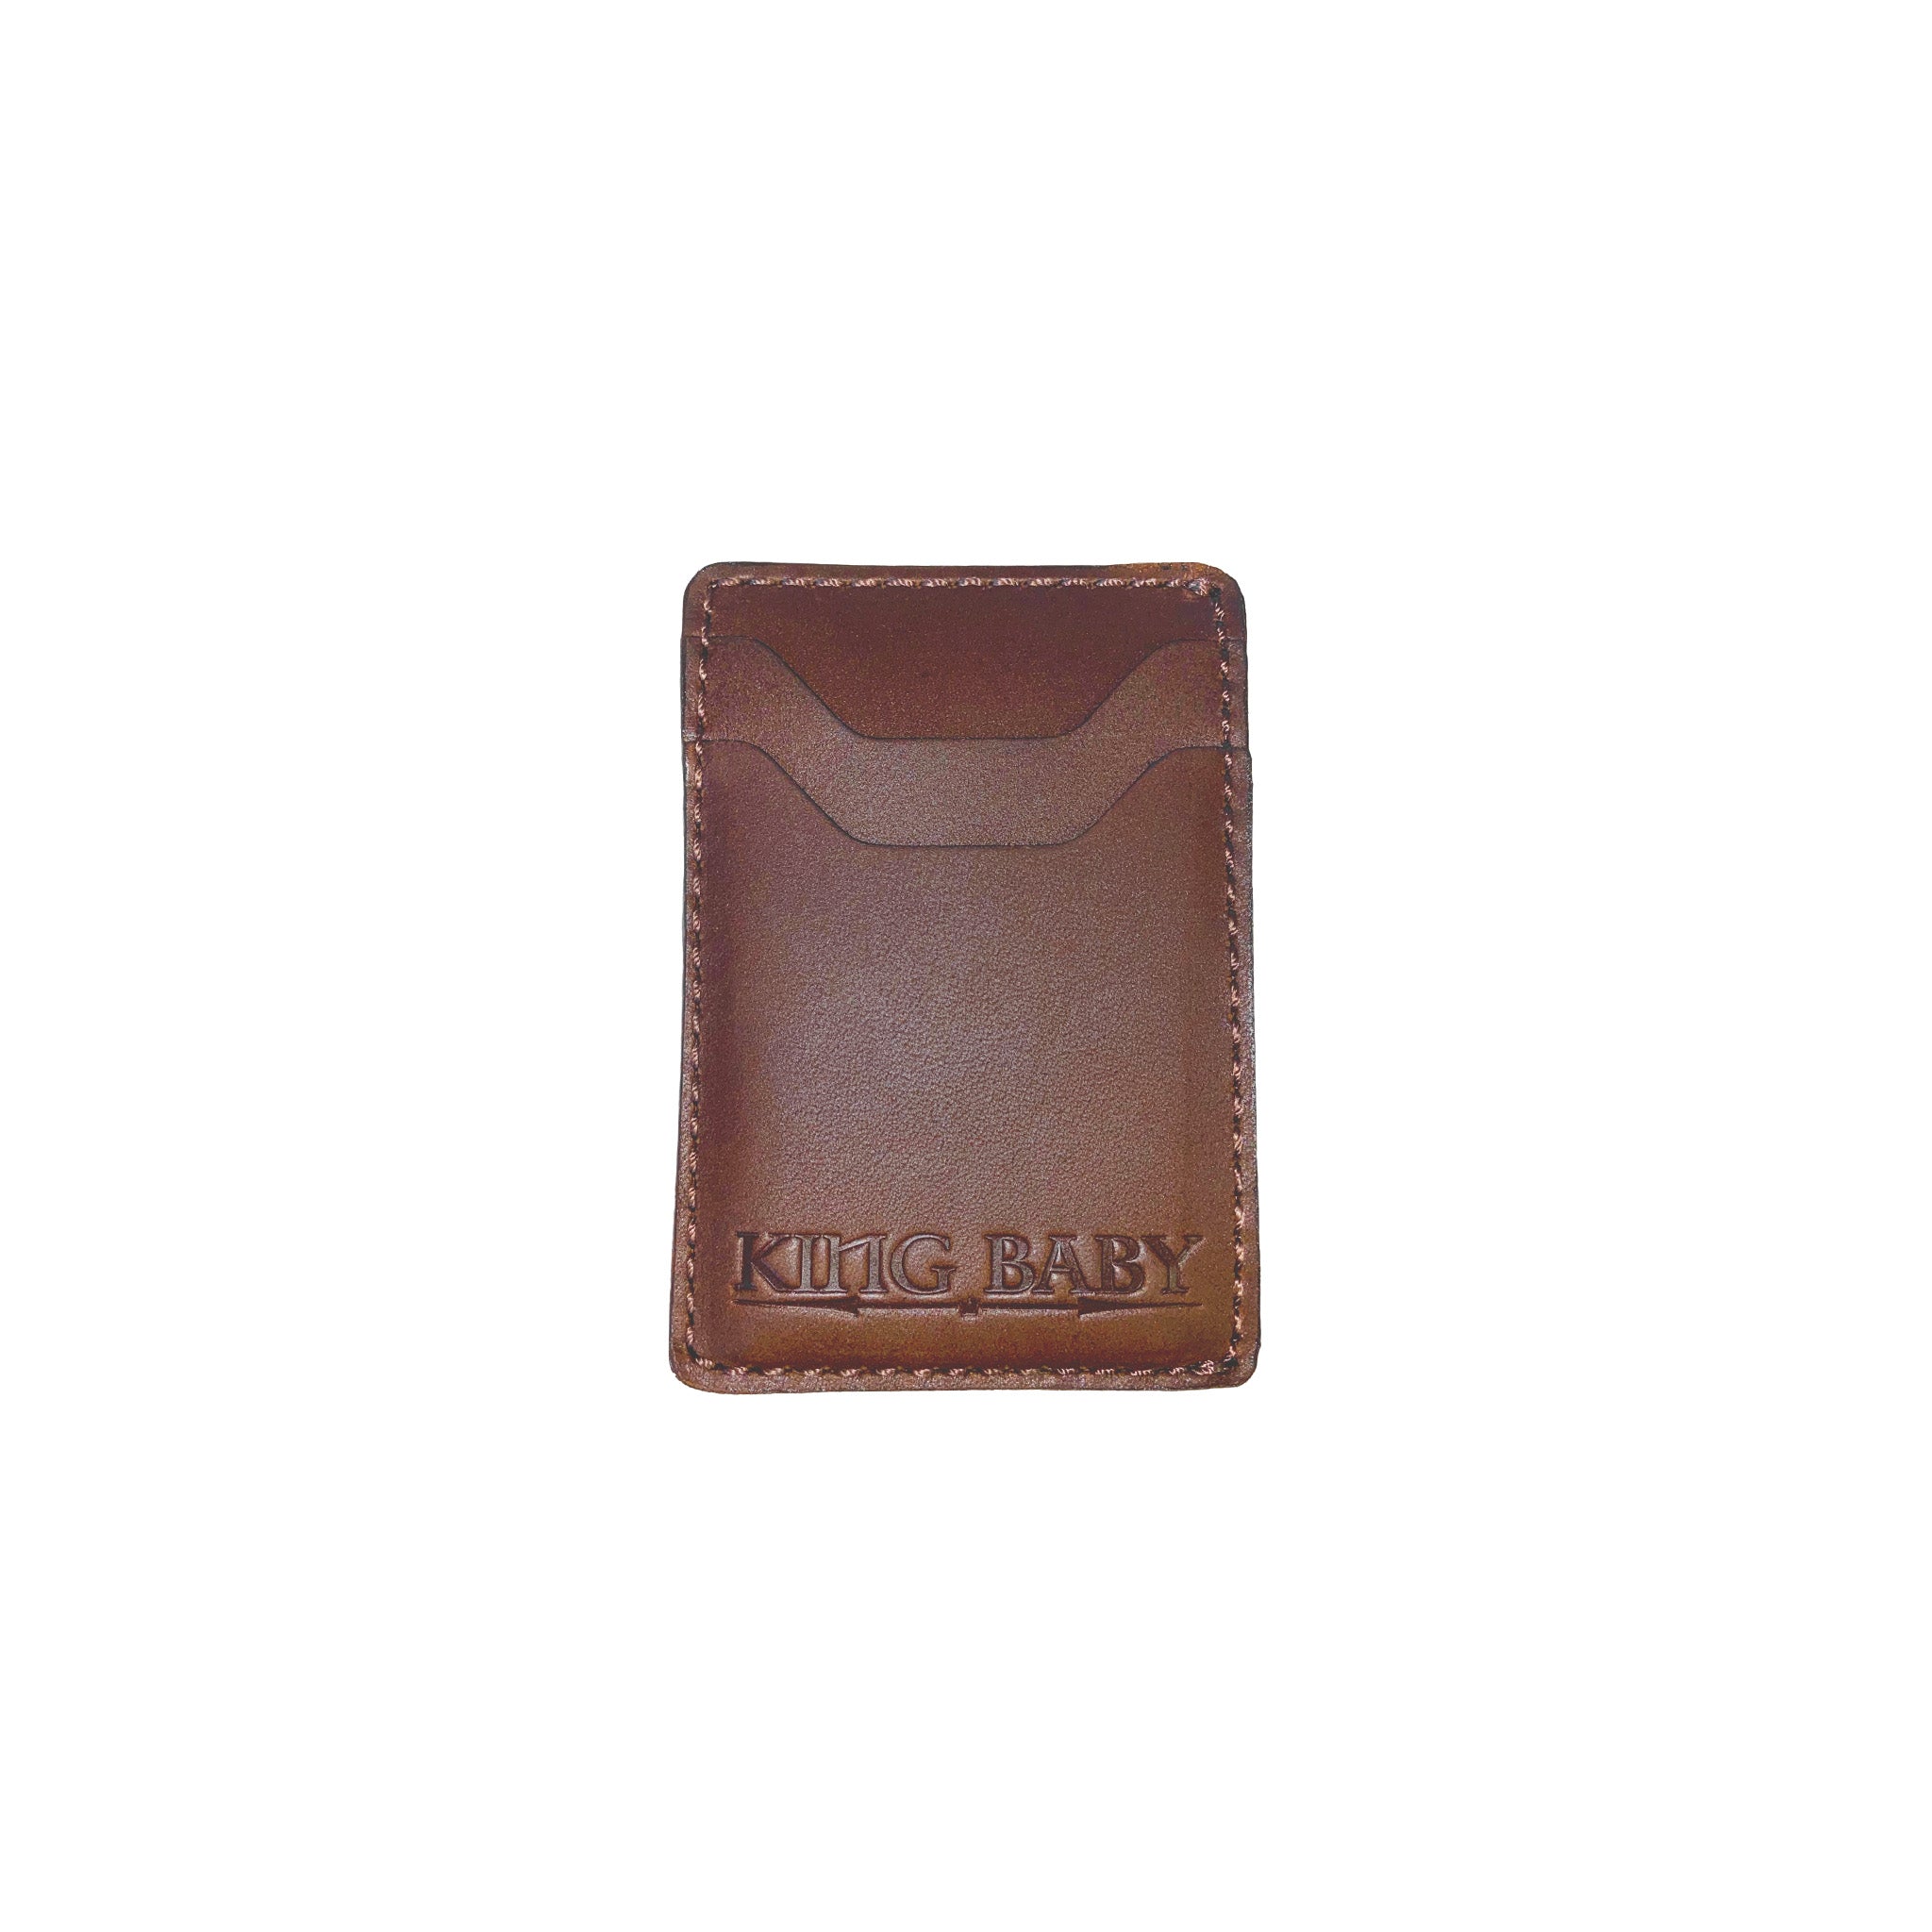 Small Leather Goods – King Baby